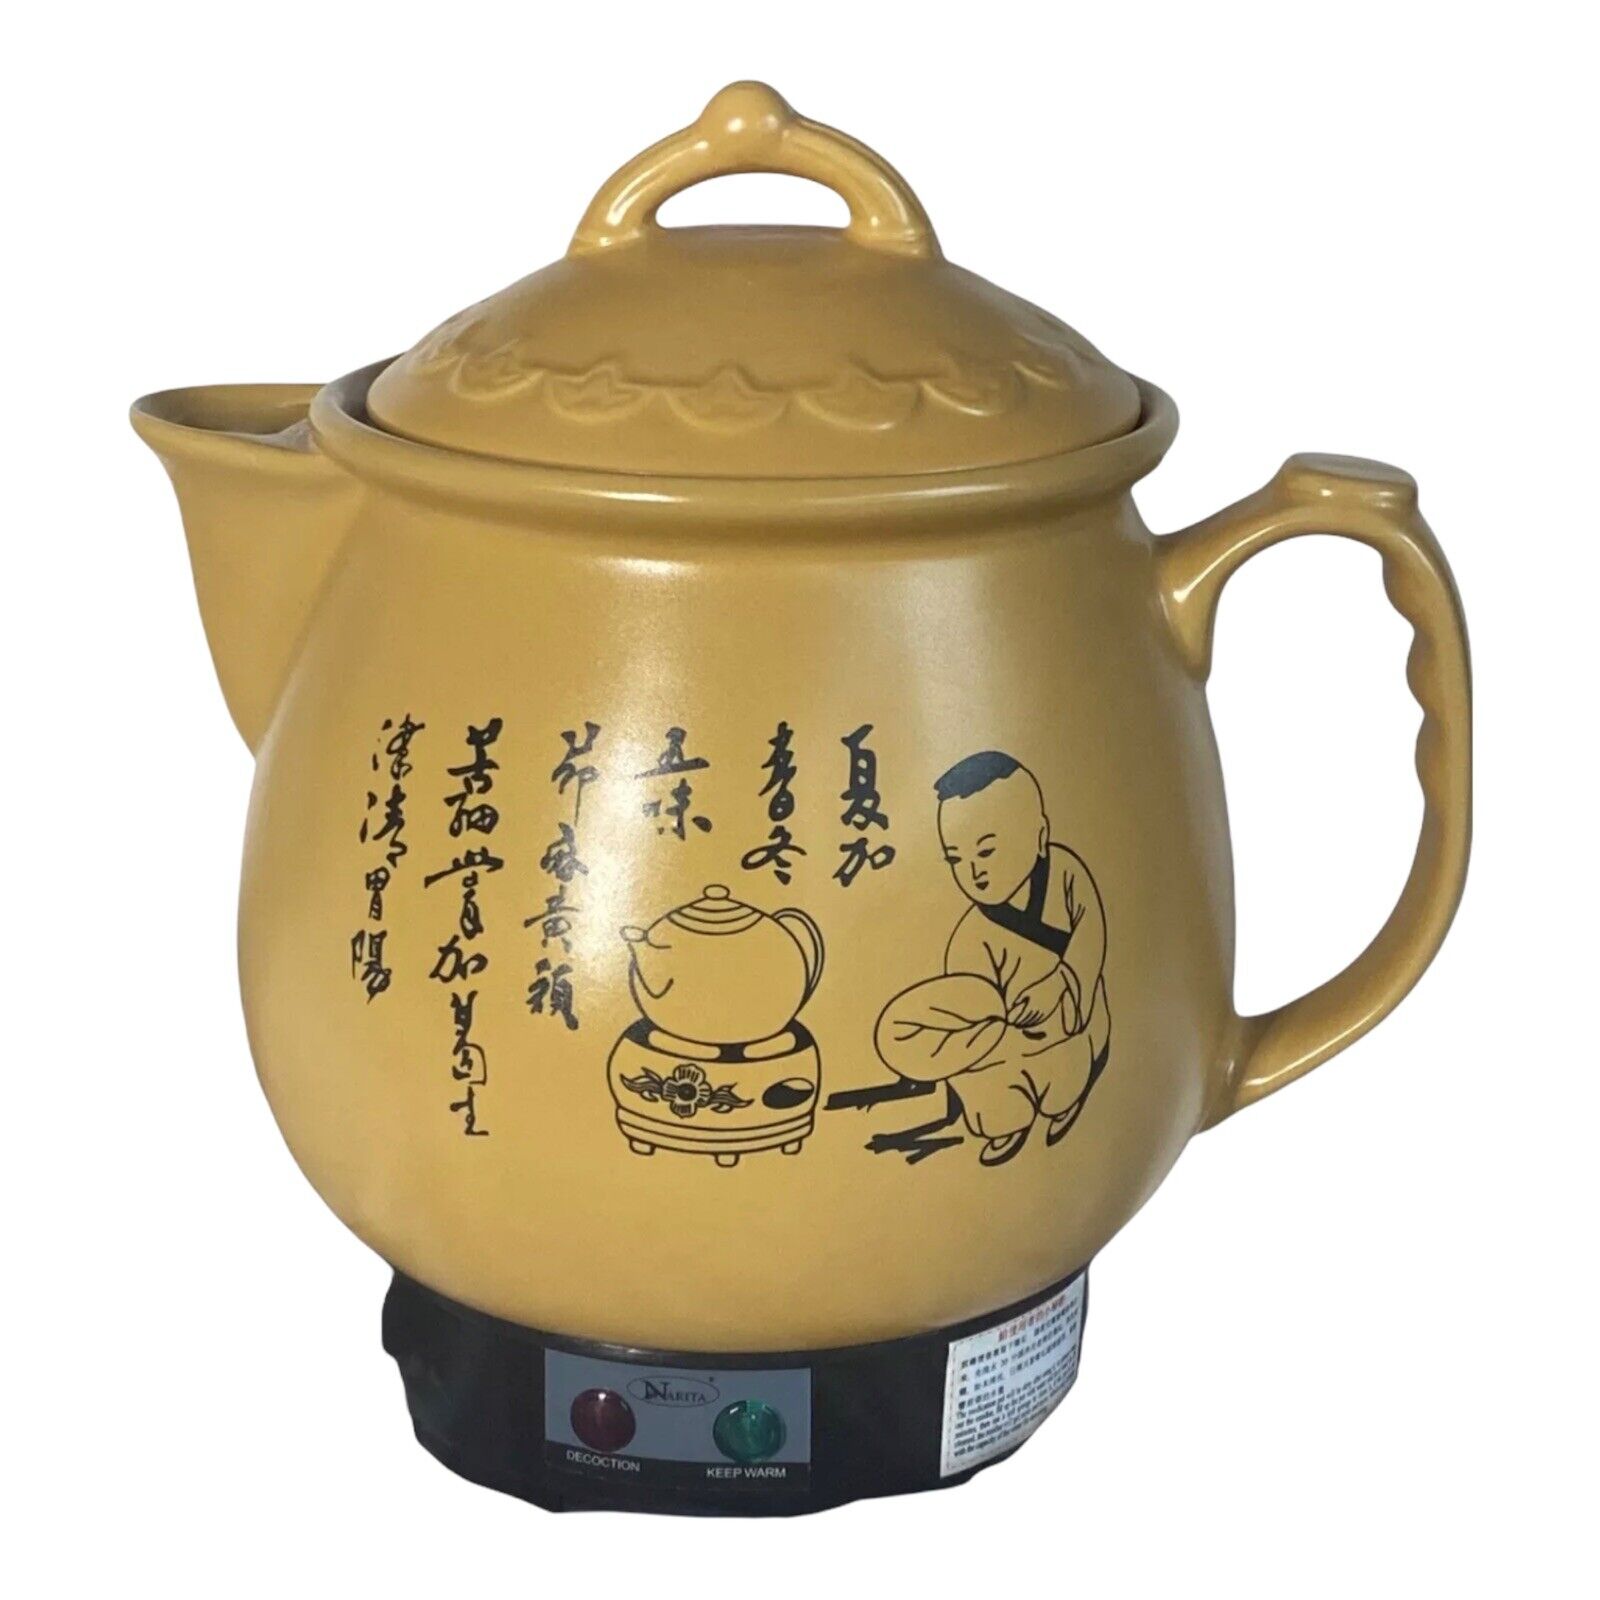 Narita Chinese Herbal Medicine Pot Gold Electric 3.8 Liters Cooks To 1 Cup